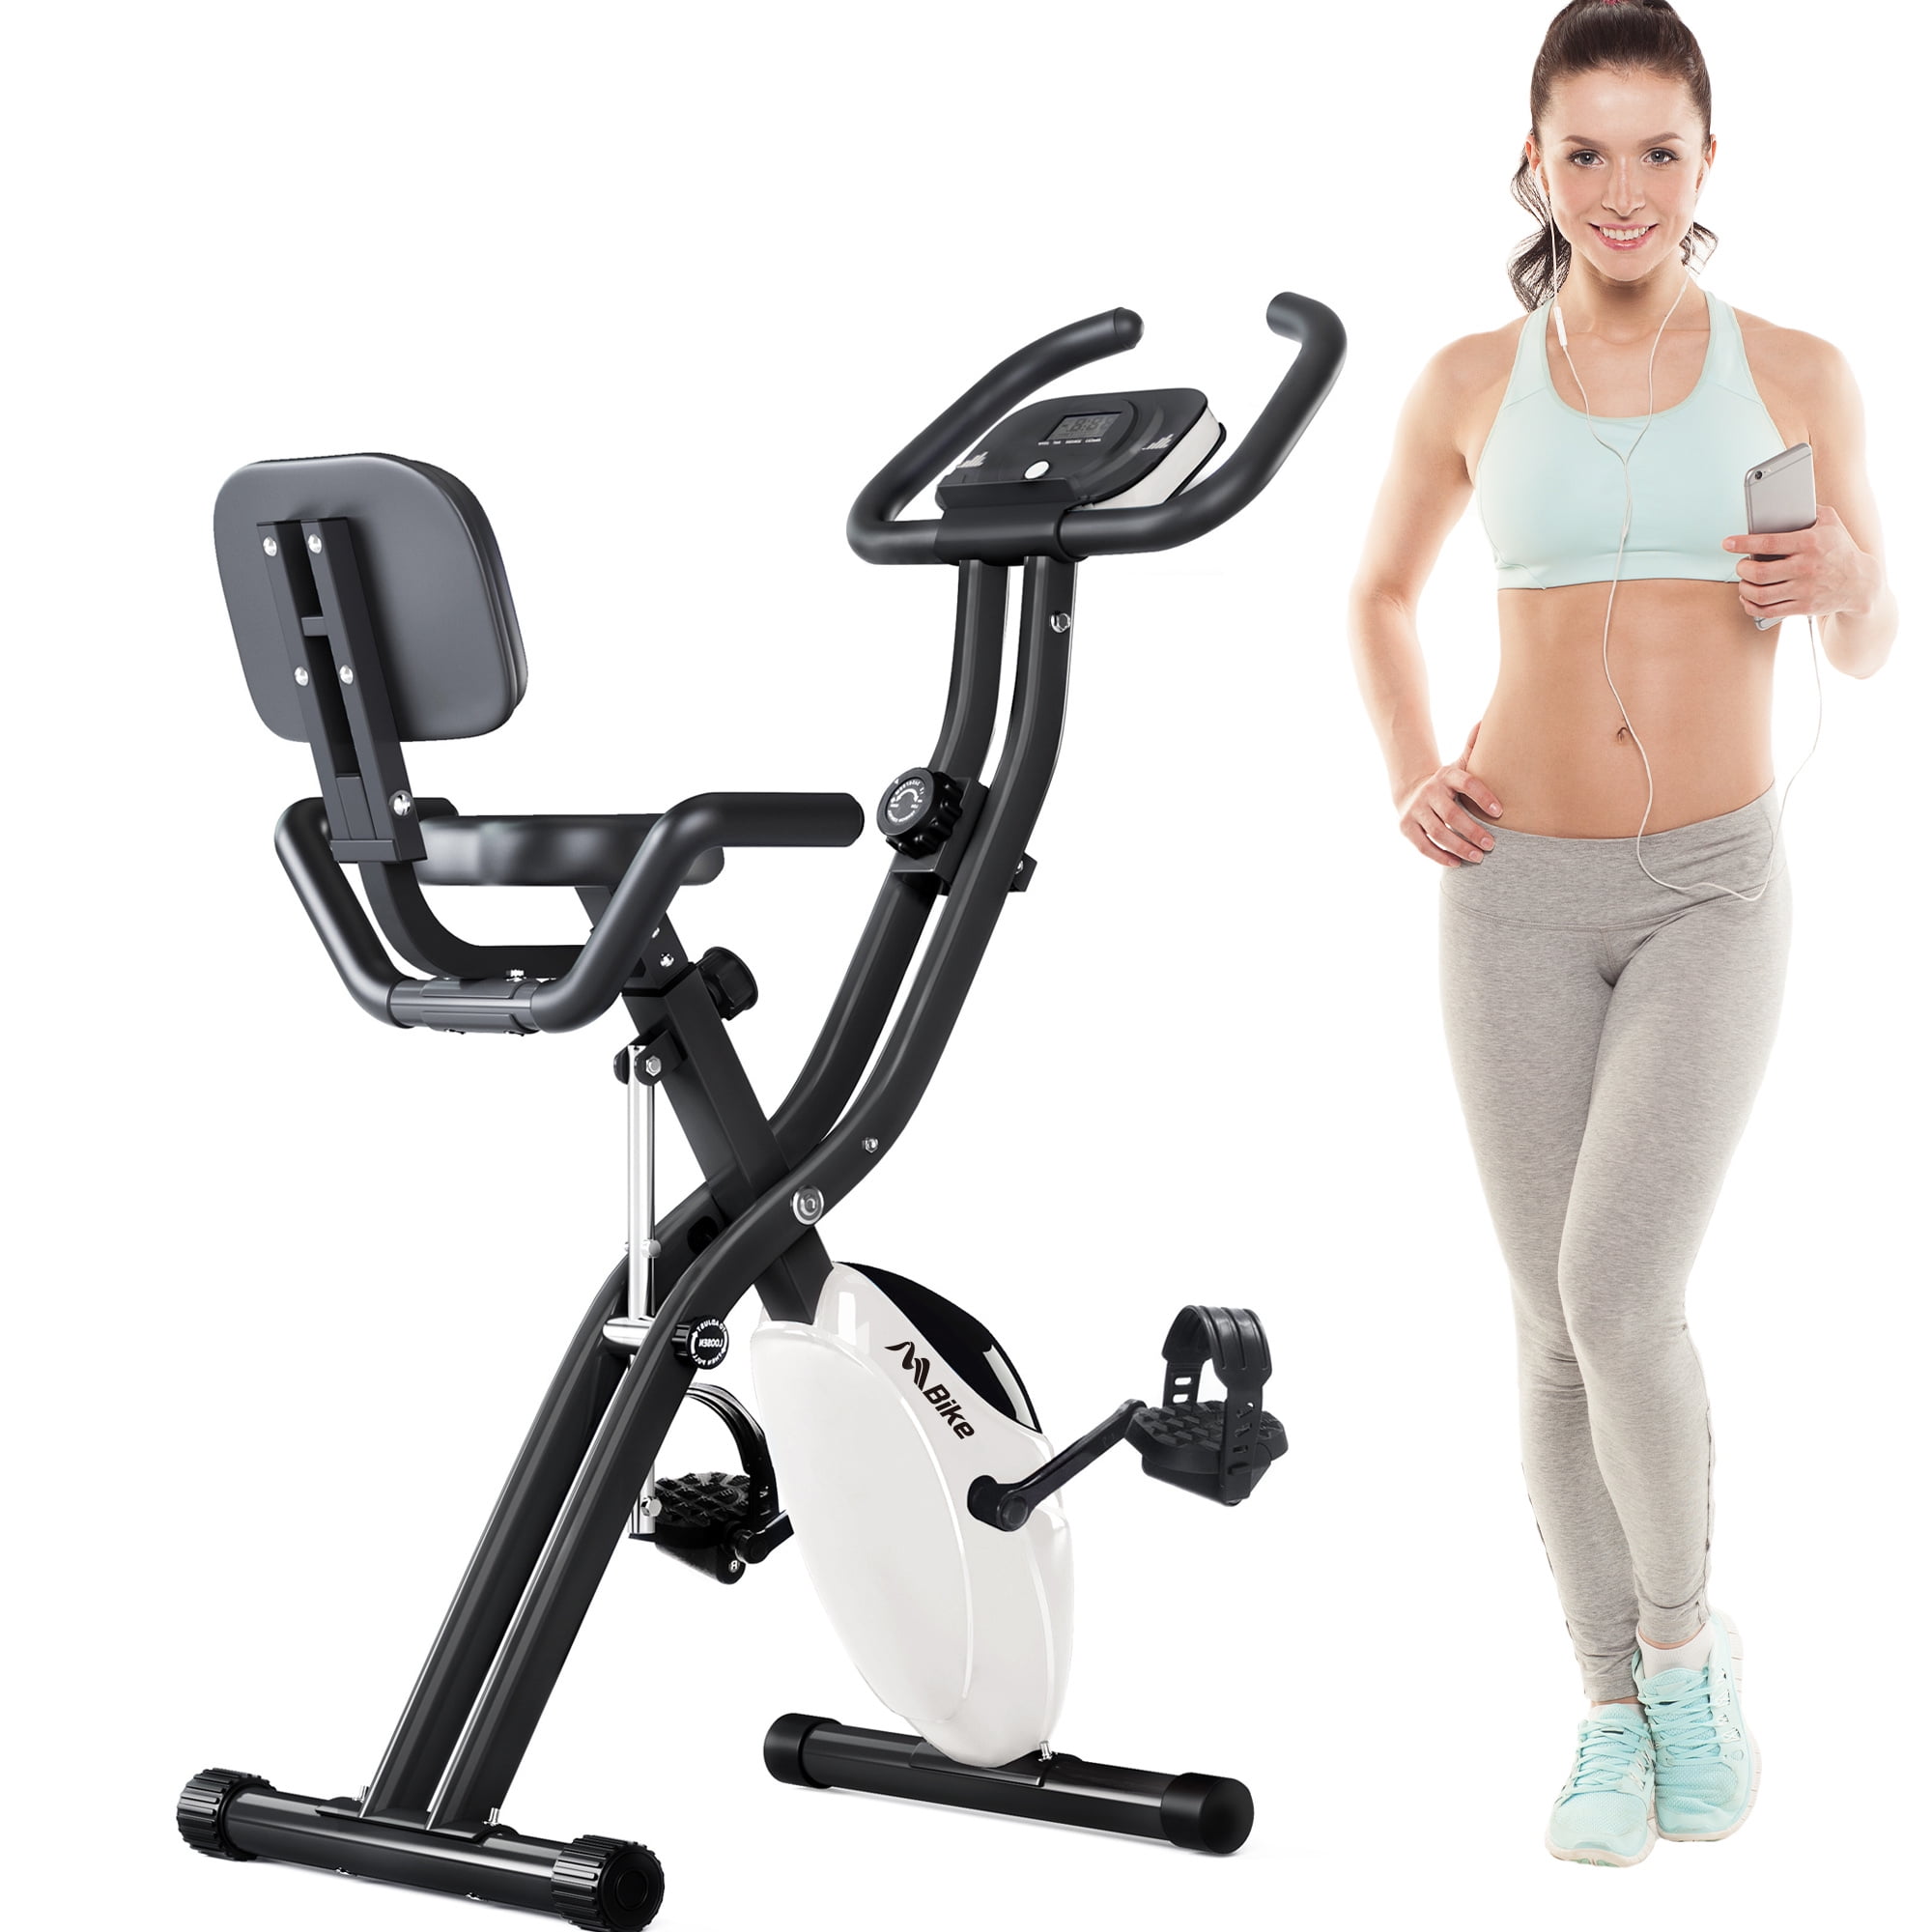 Details about   Folding 10 Levels Magnetic Resistance Upright Exercise Bike With LCD CA86 09 